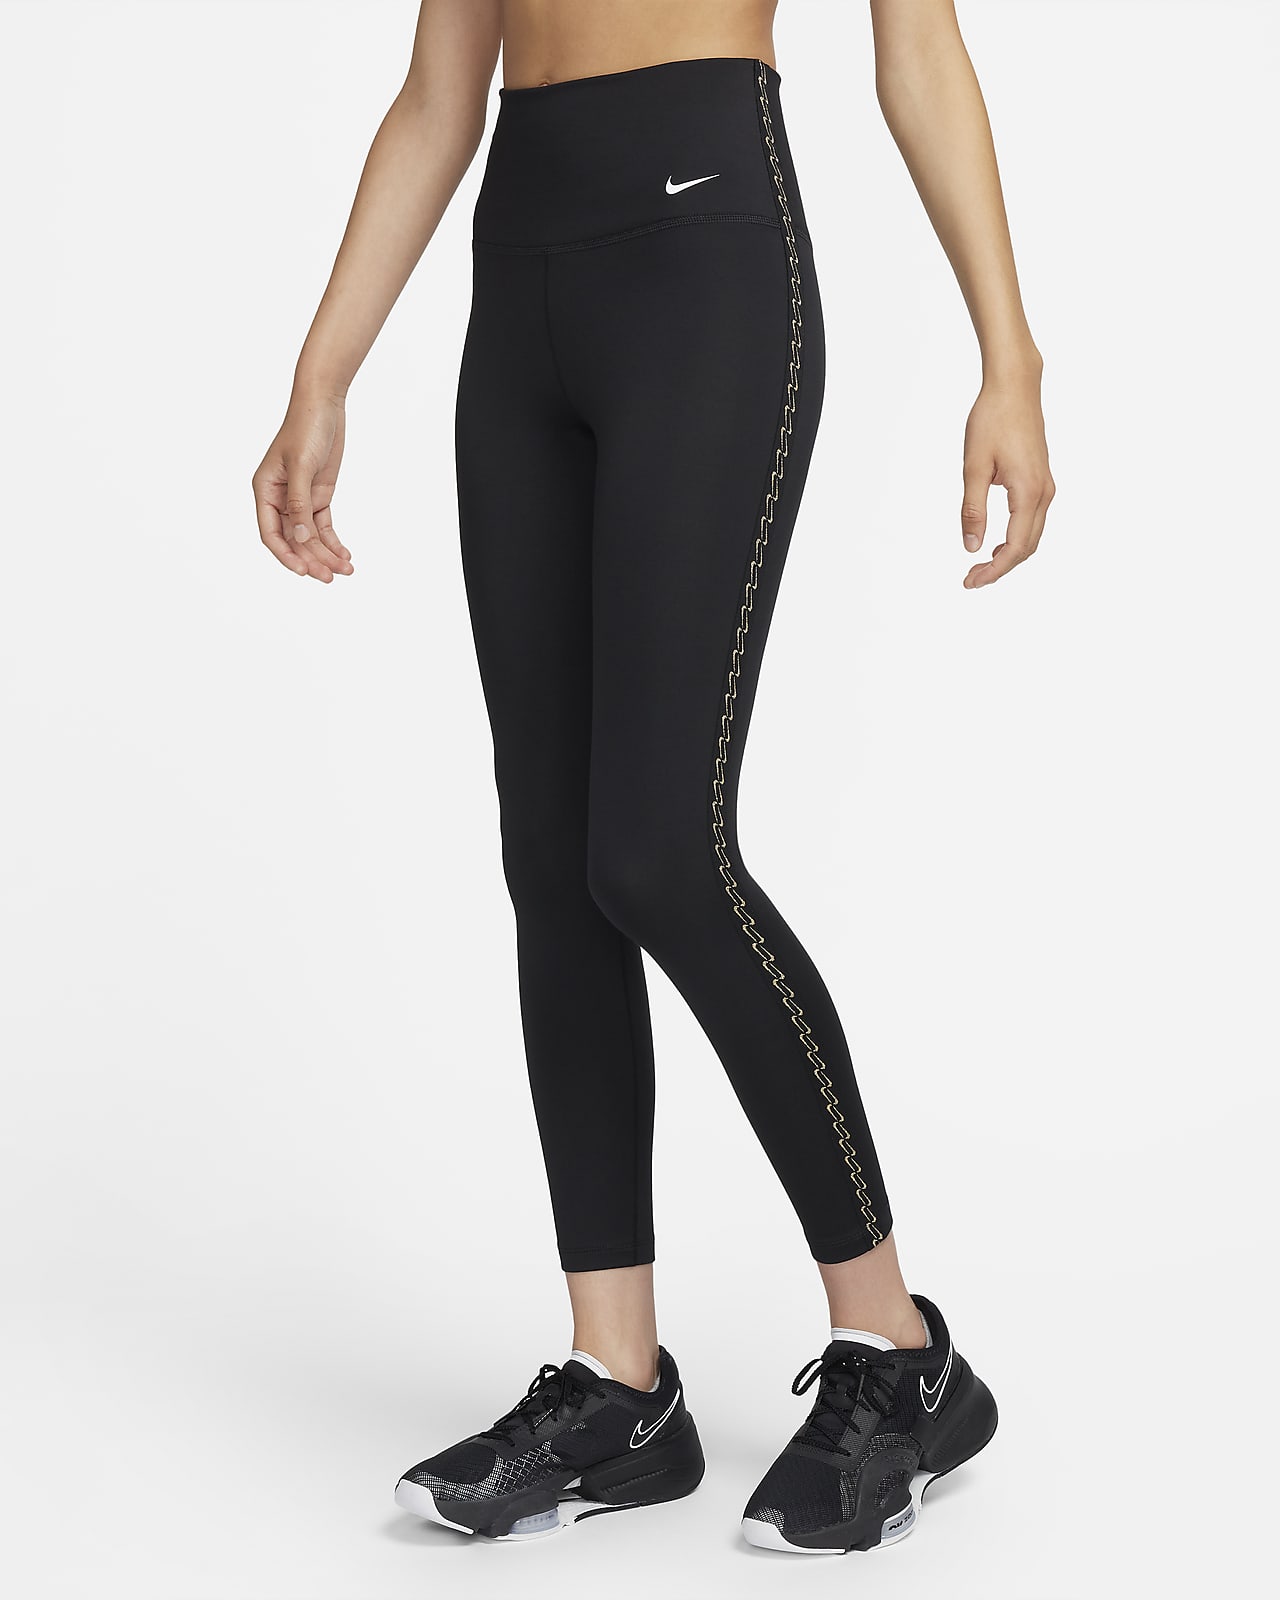 https://static.nike.com/a/images/t_PDP_1280_v1/f_auto,q_auto:eco/93158e92-05fb-45b6-90ed-f5f951e67bac/one-7-8-legging-met-hoge-taille-dames-PDVB5S.png